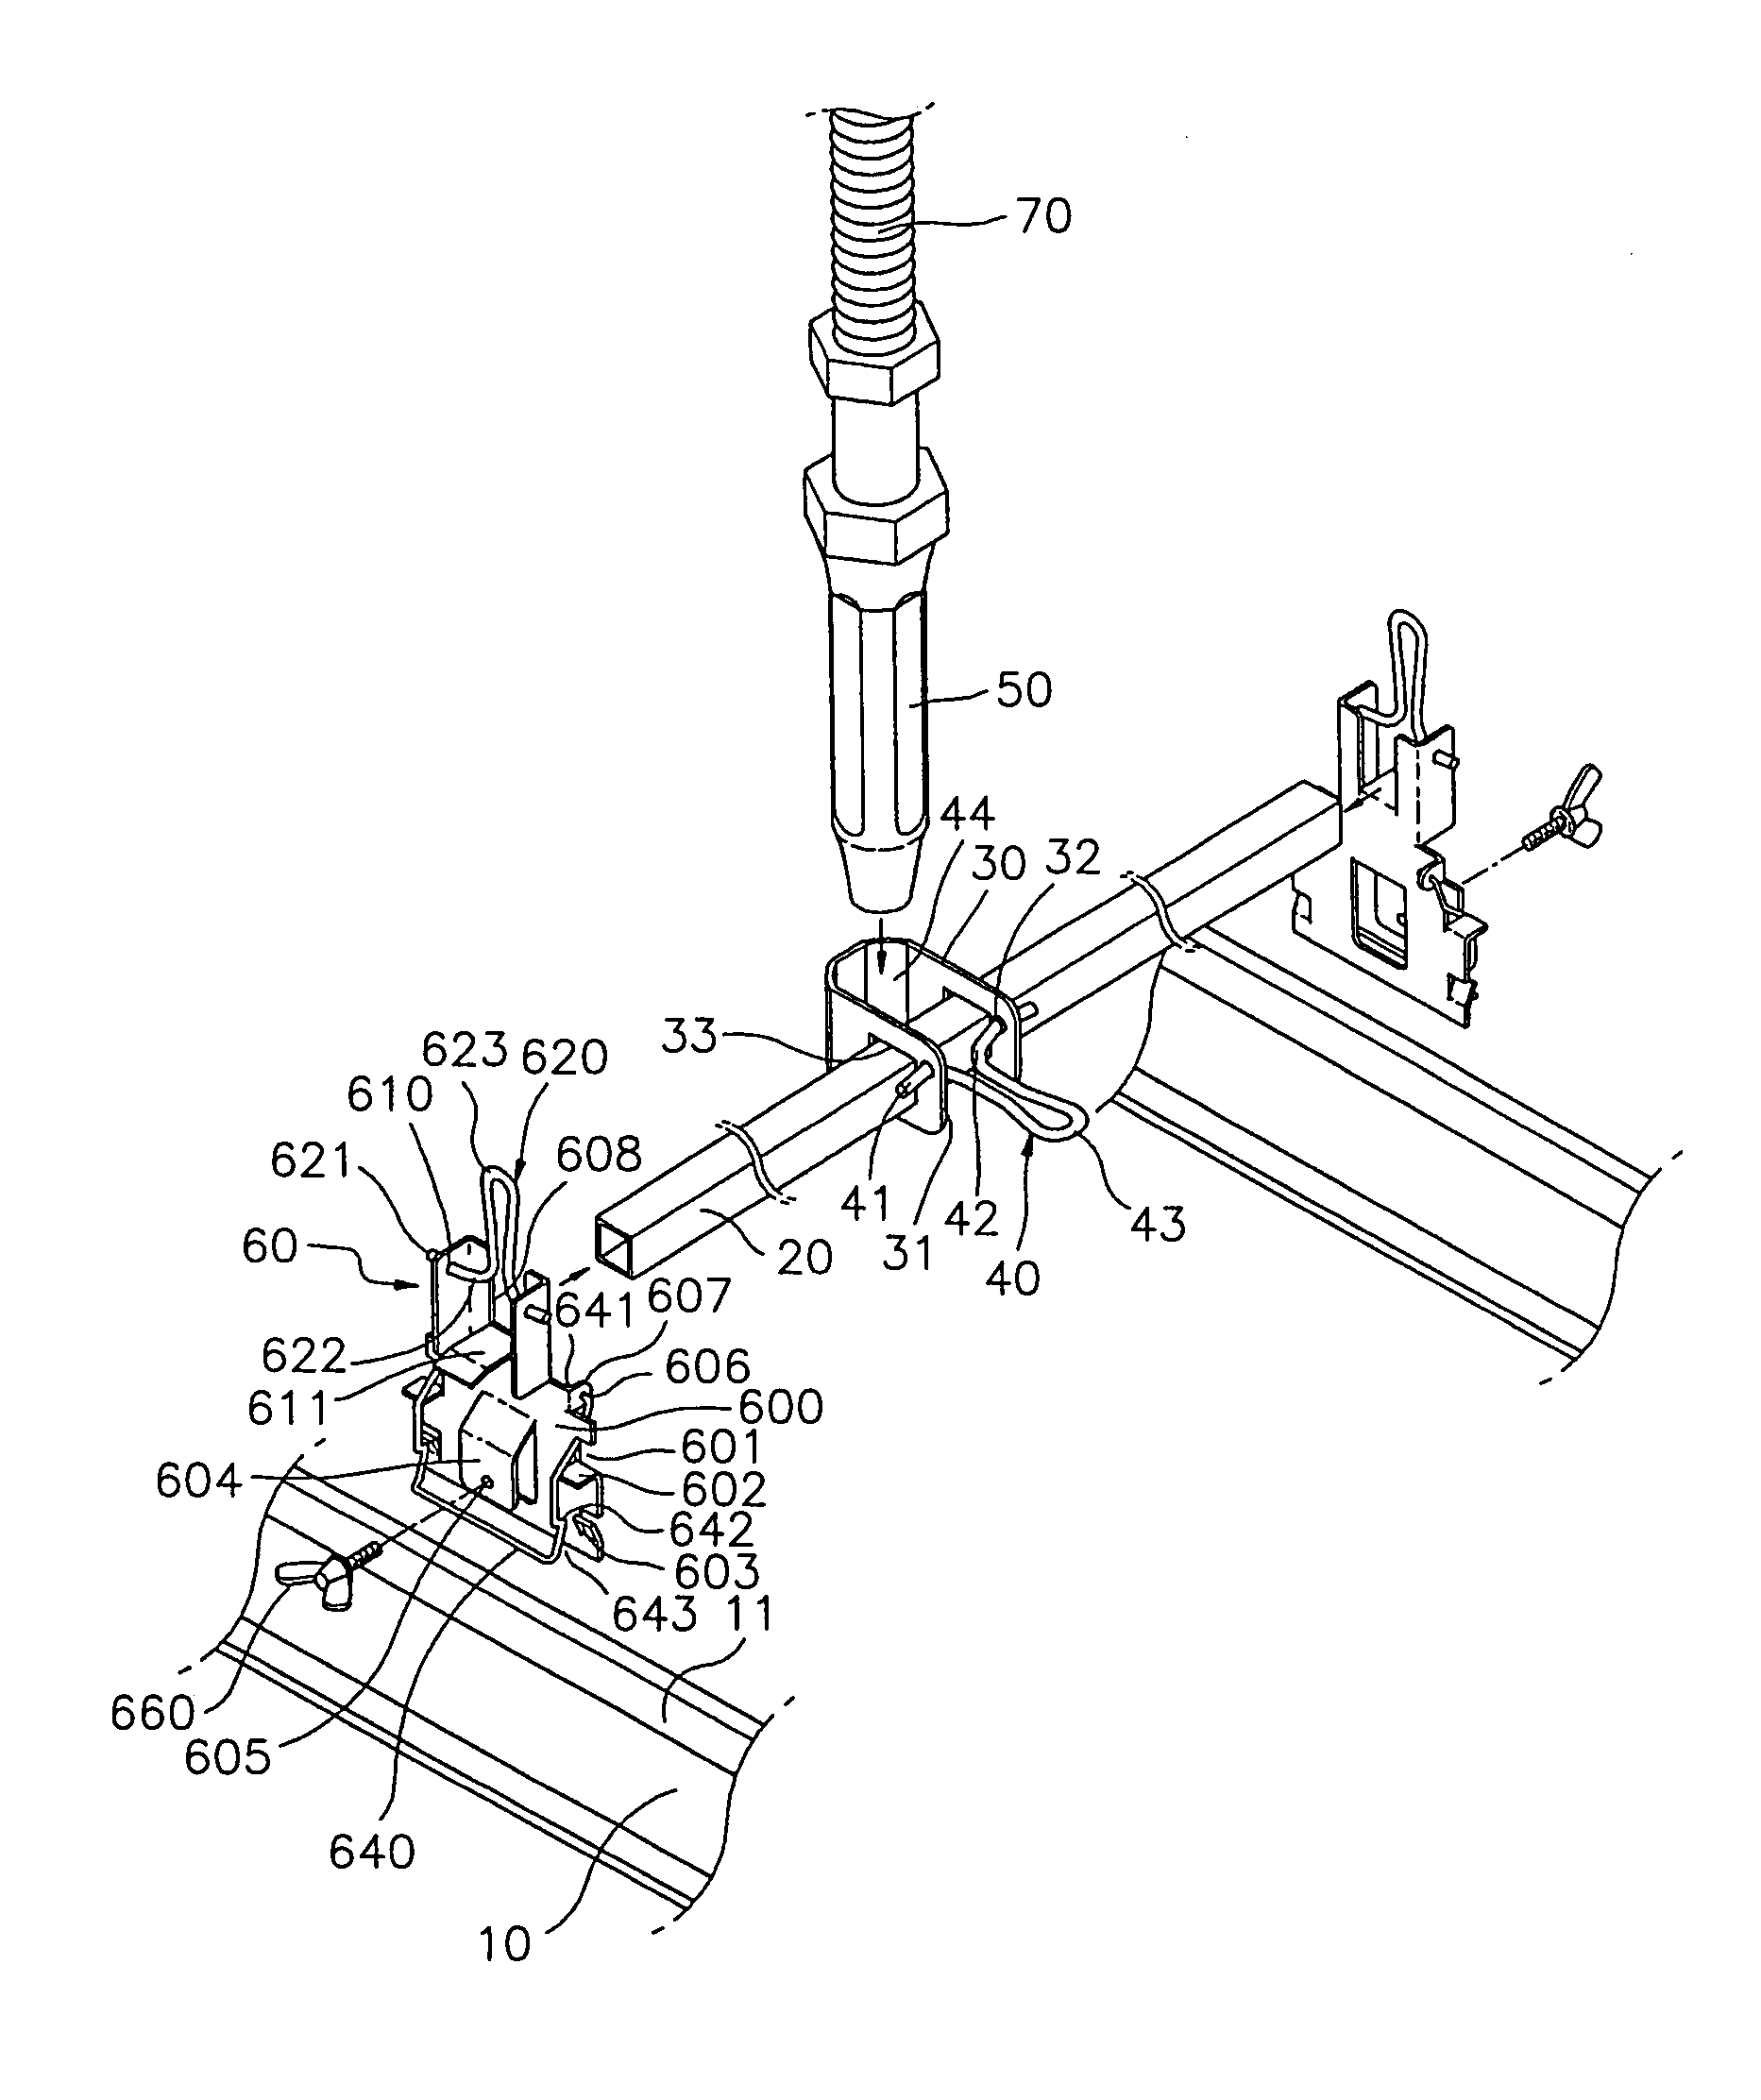 Stock bar and T-bar coupling structure for mounting sprinkler